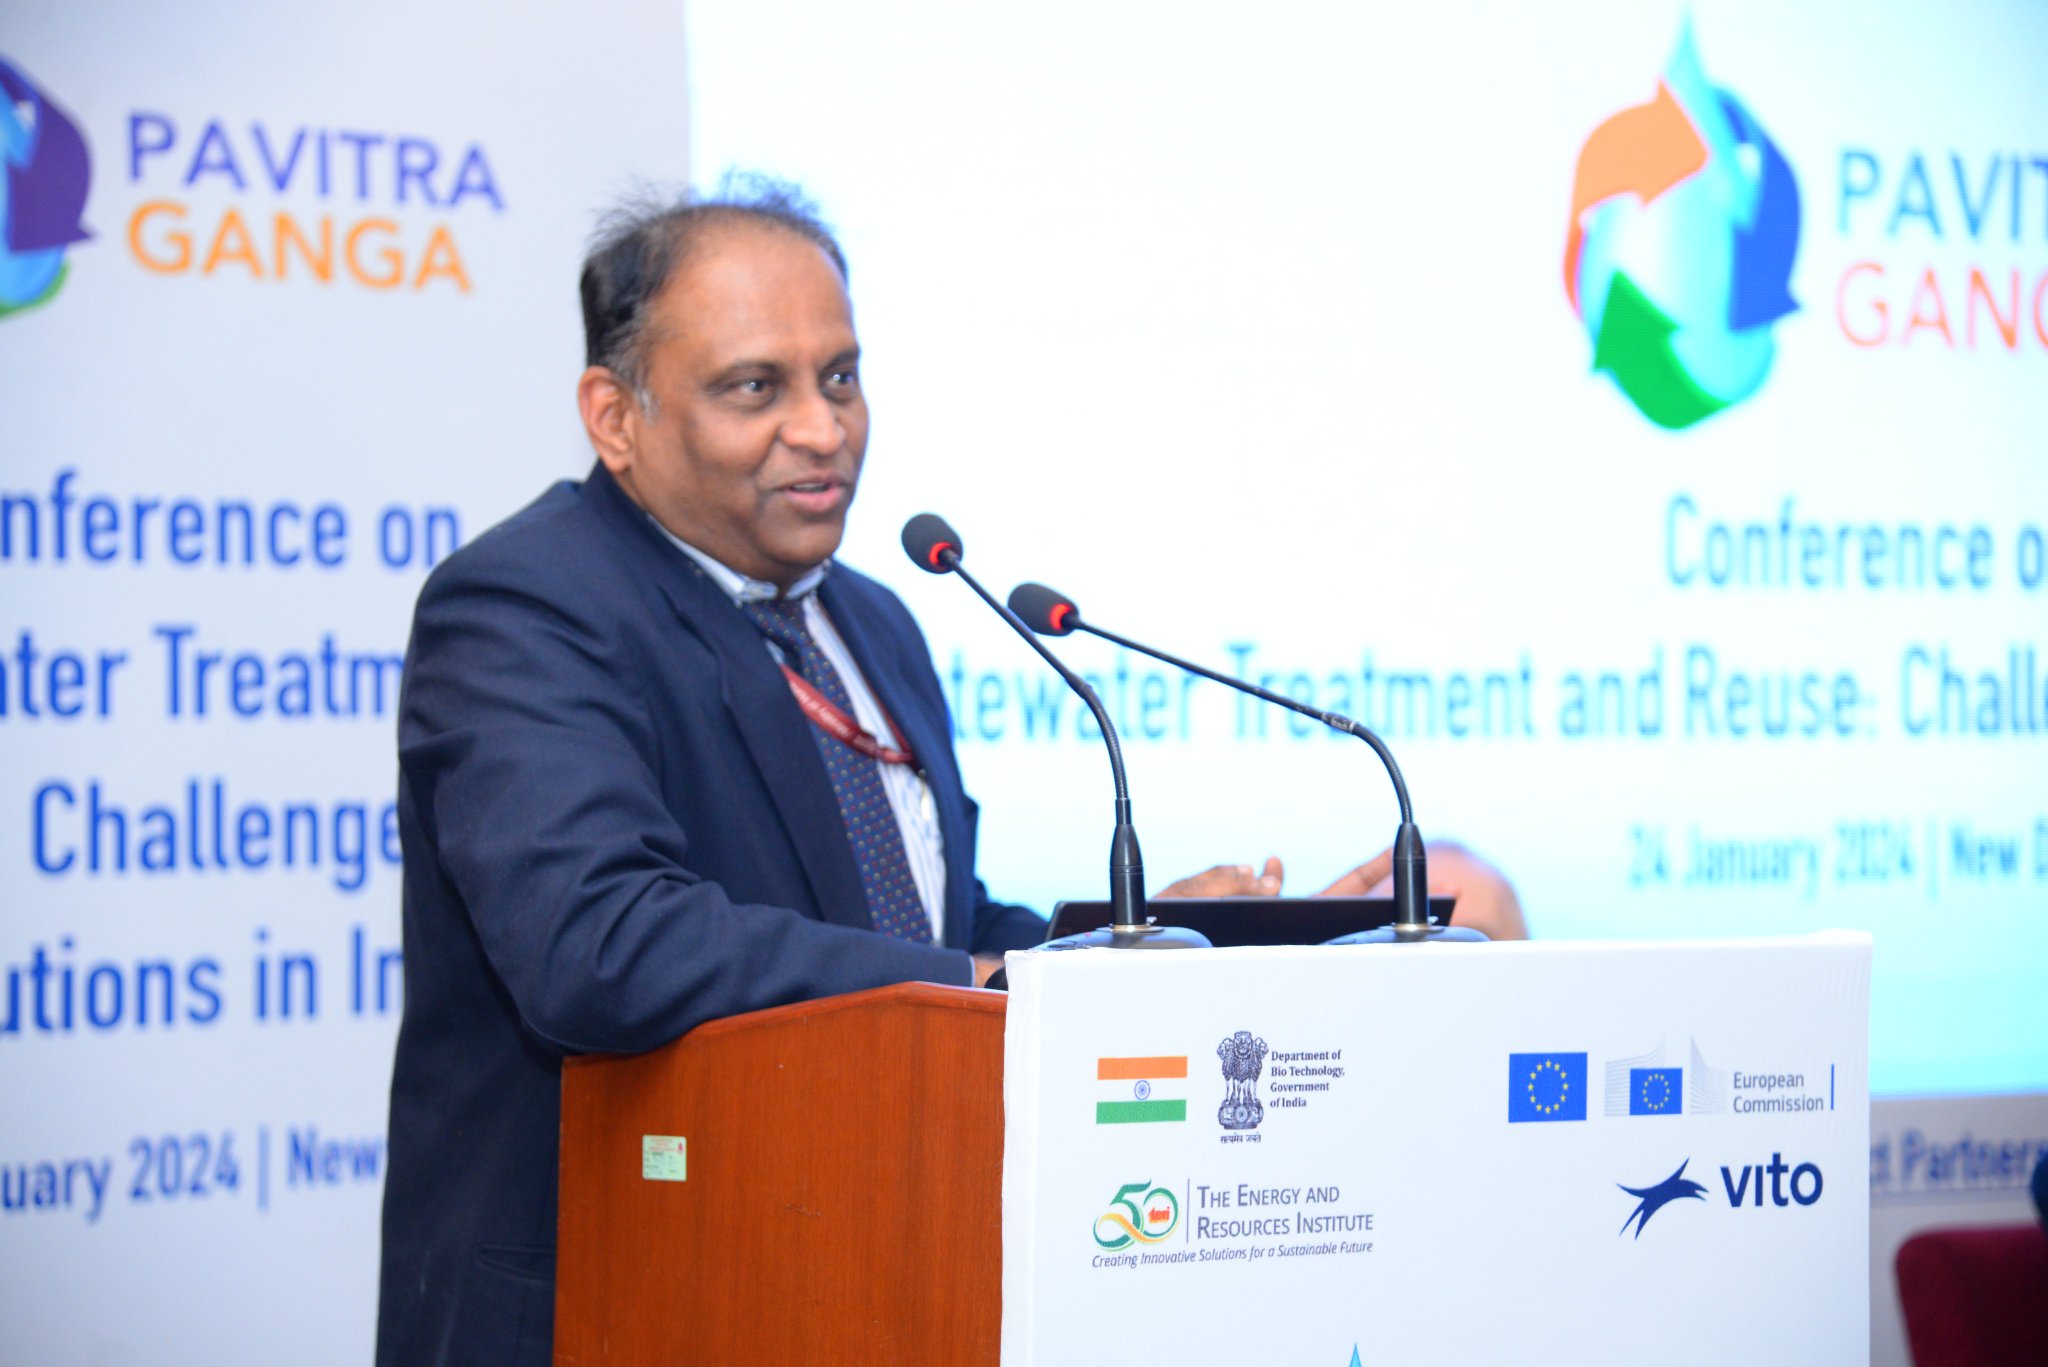 G. Asok Kumar, Director General of the National Mission for Clean Ganga (NMCG) ,(Ministry of Jal Shakti, Government of India)